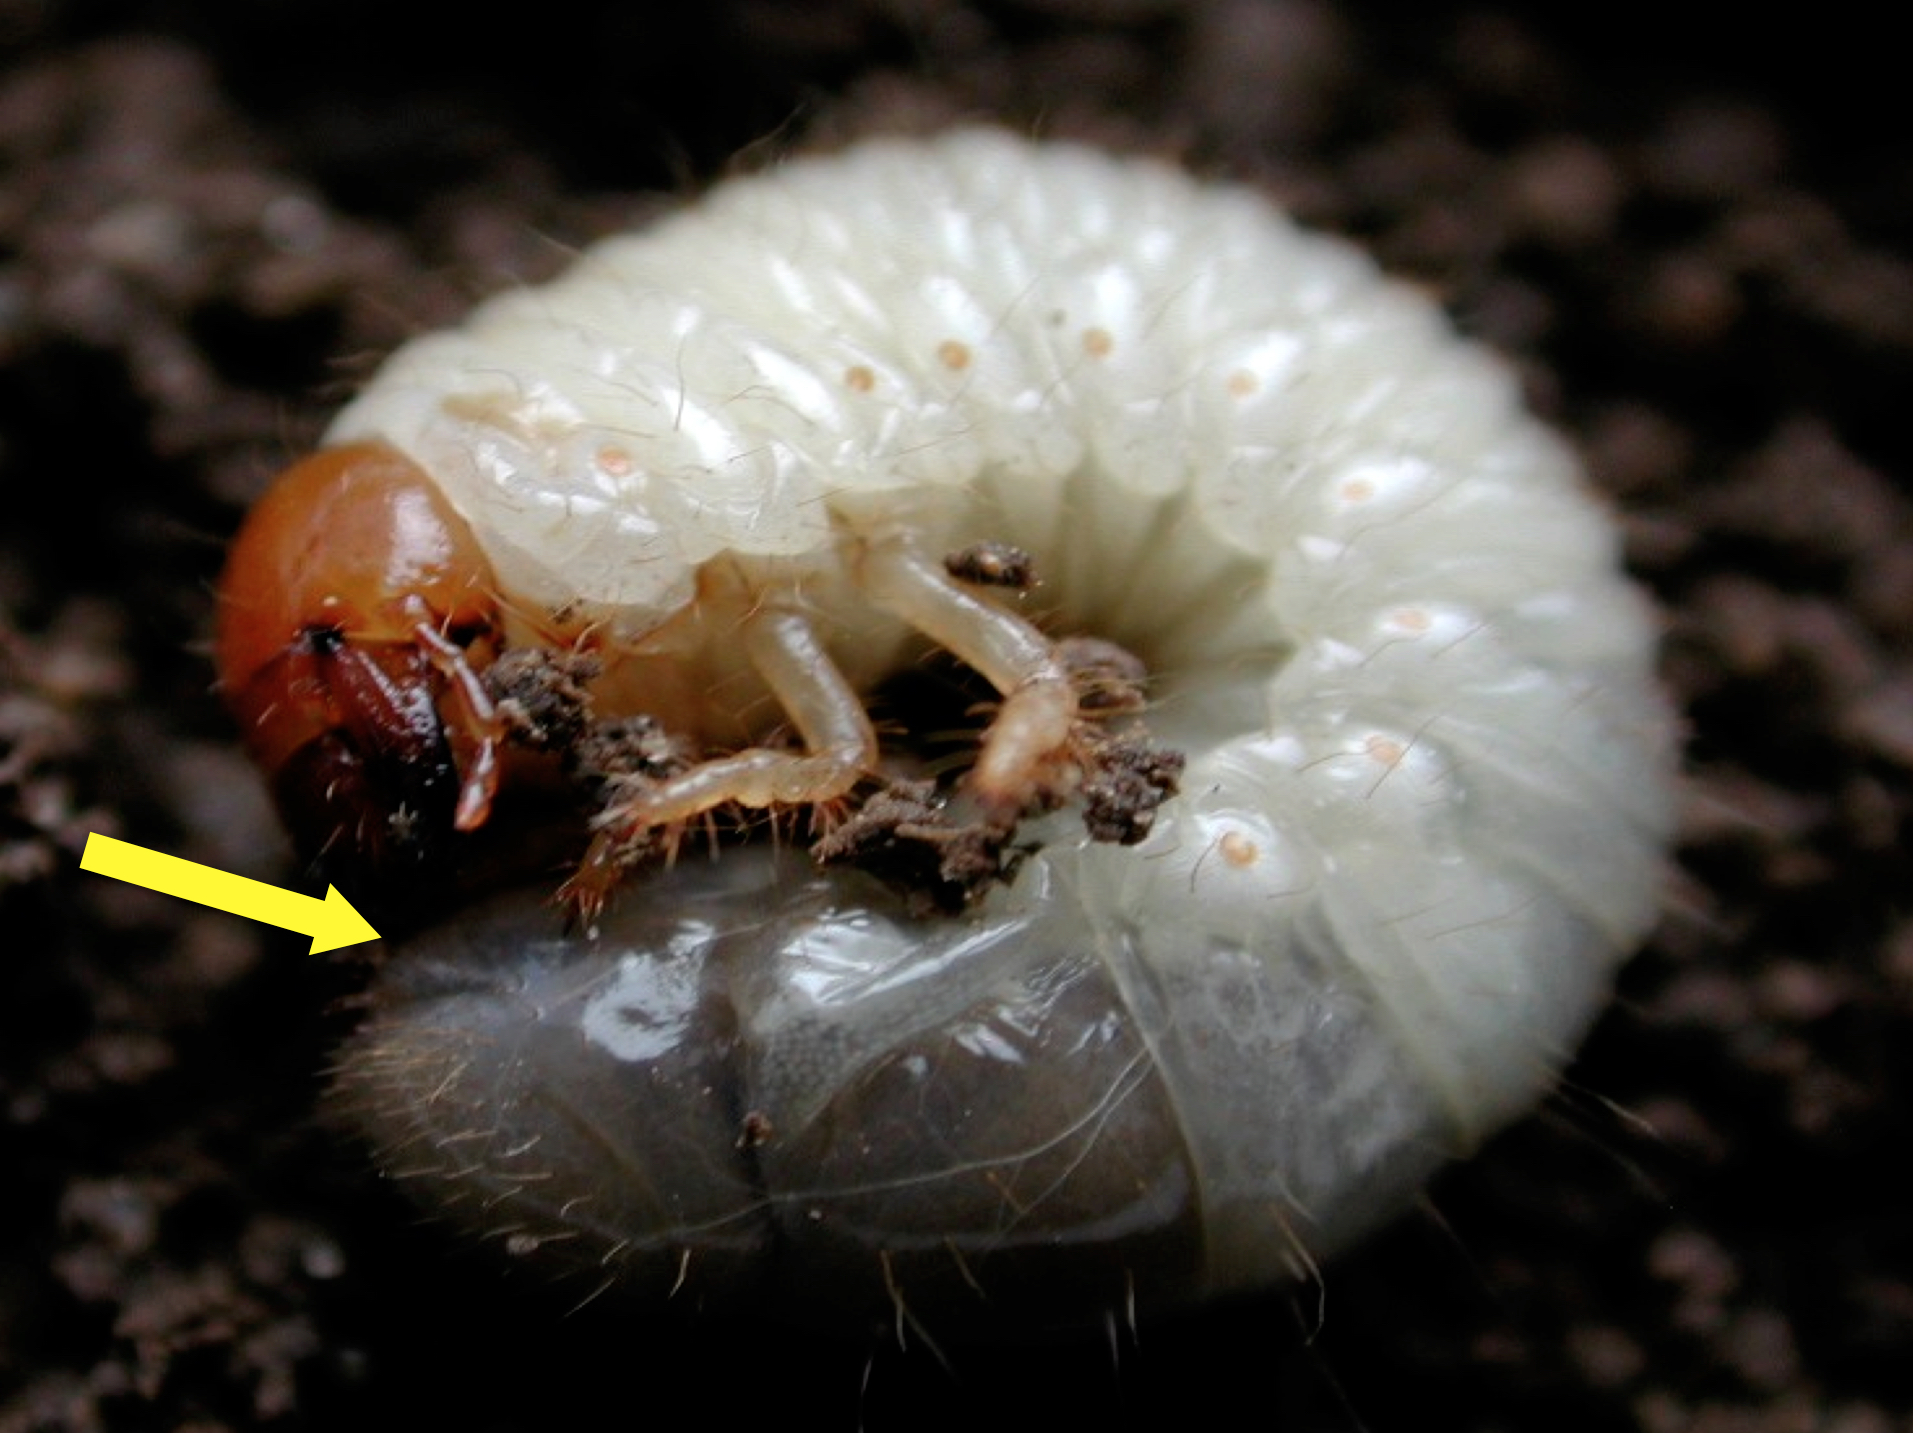 The Simple Guide To Diagnosing And Controlling A Grub Infestation